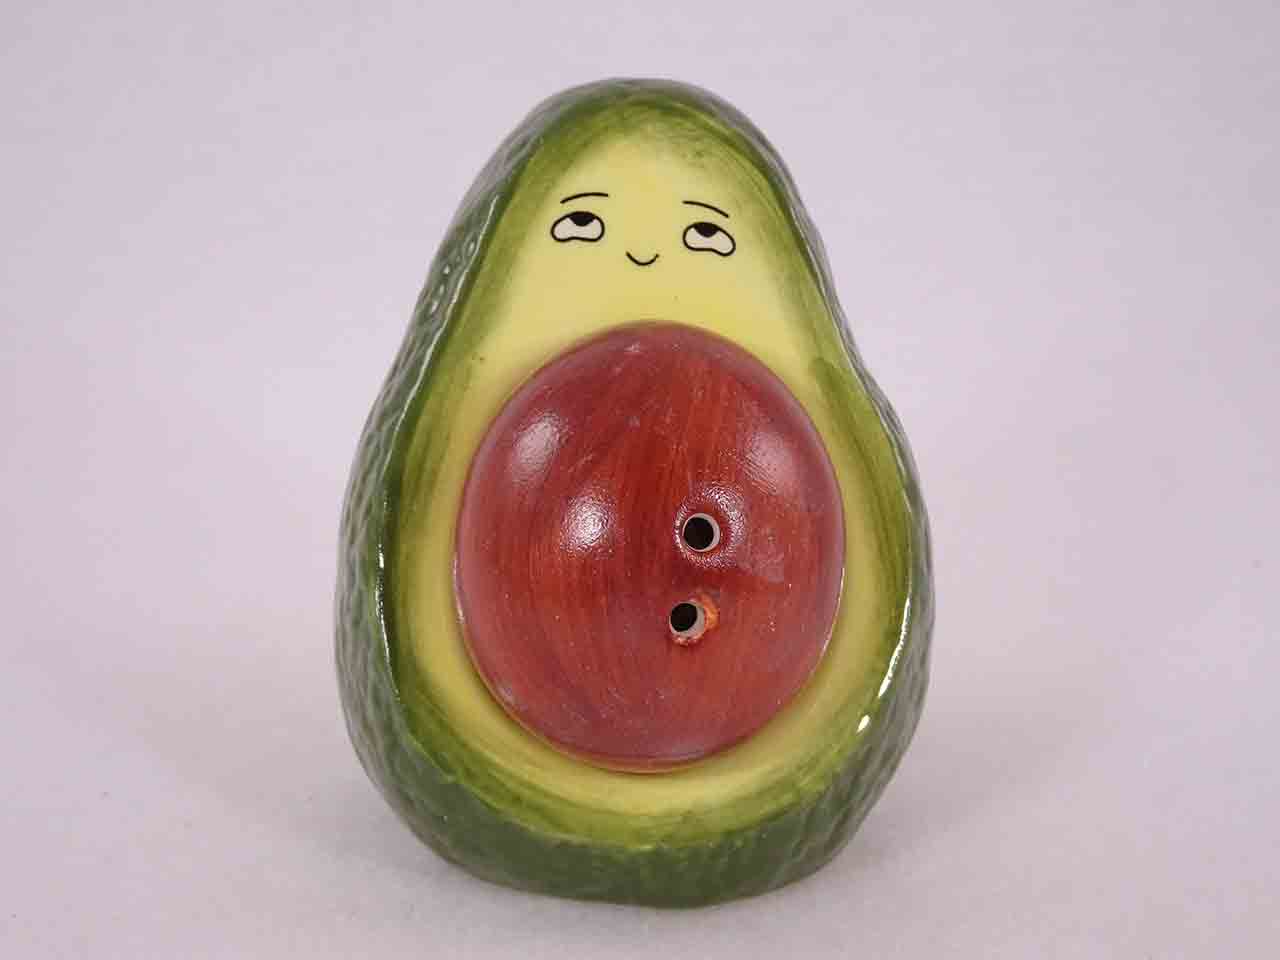 Anthropomorphic avocado half with pit salt and pepper shaker - magnetic